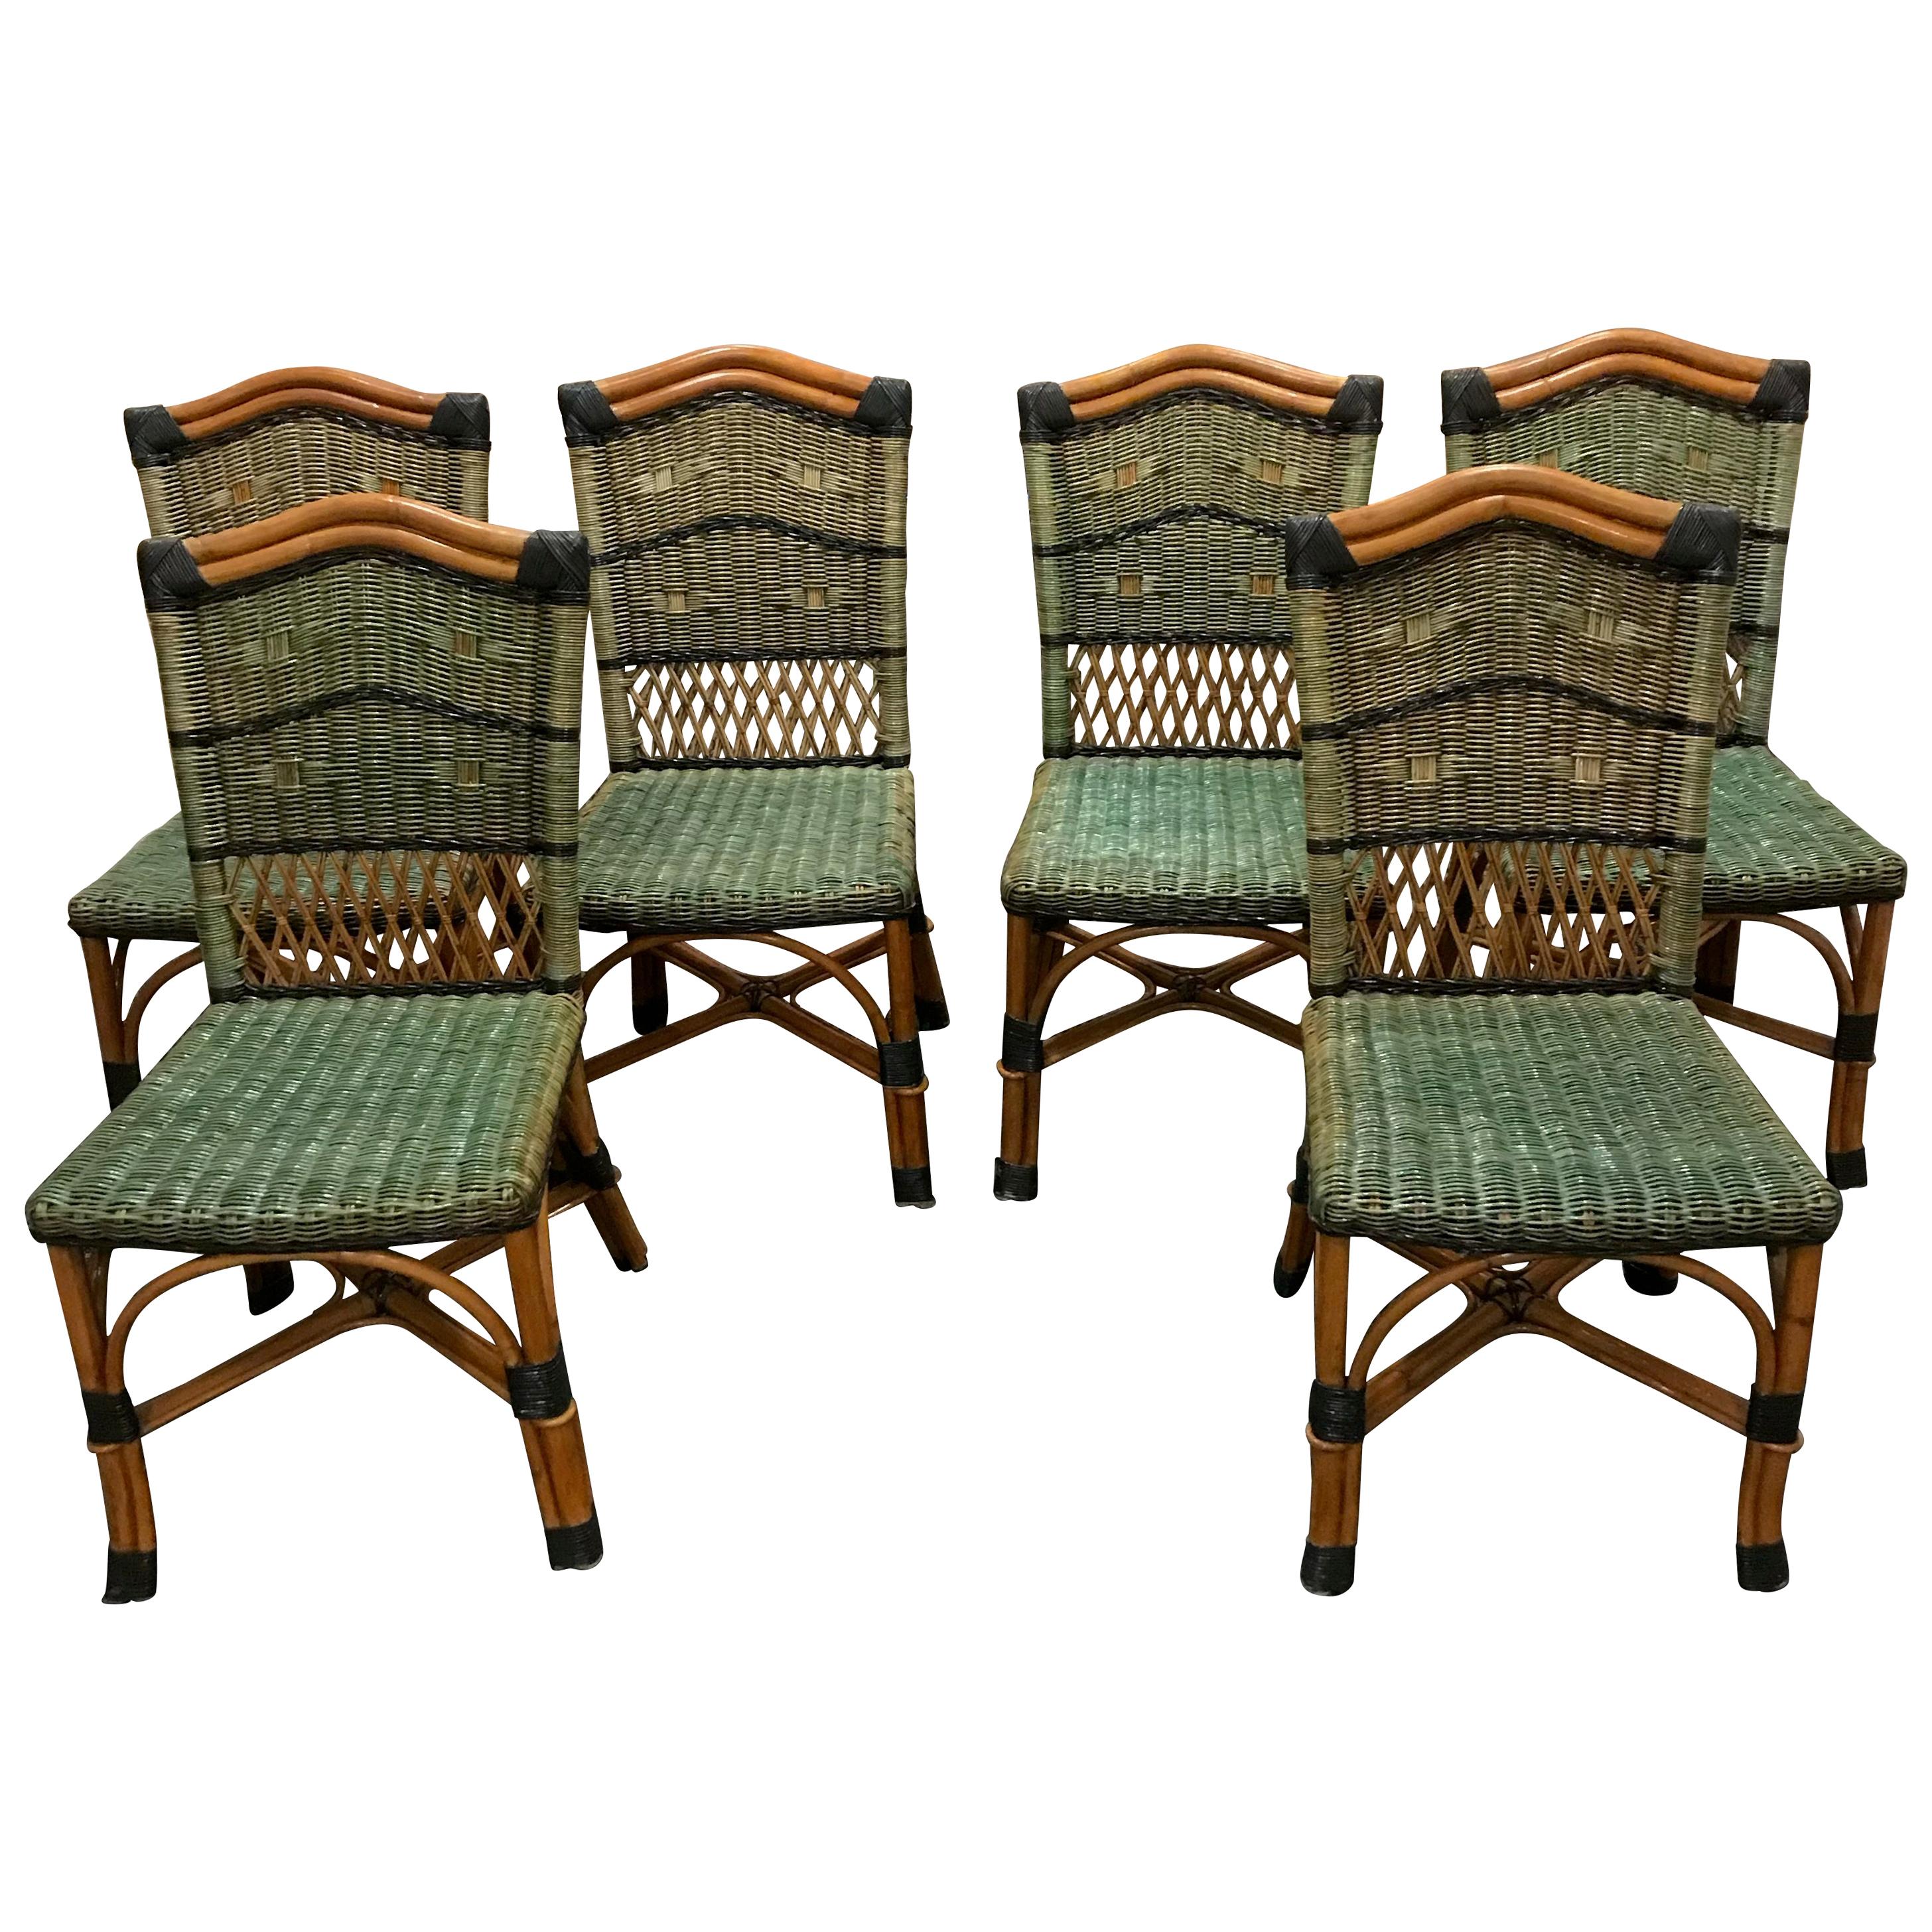 Grange Dining Chairs - For Sale on 1stDibs | grange table and chairs,  vintage grange furniture, grange garden furniture